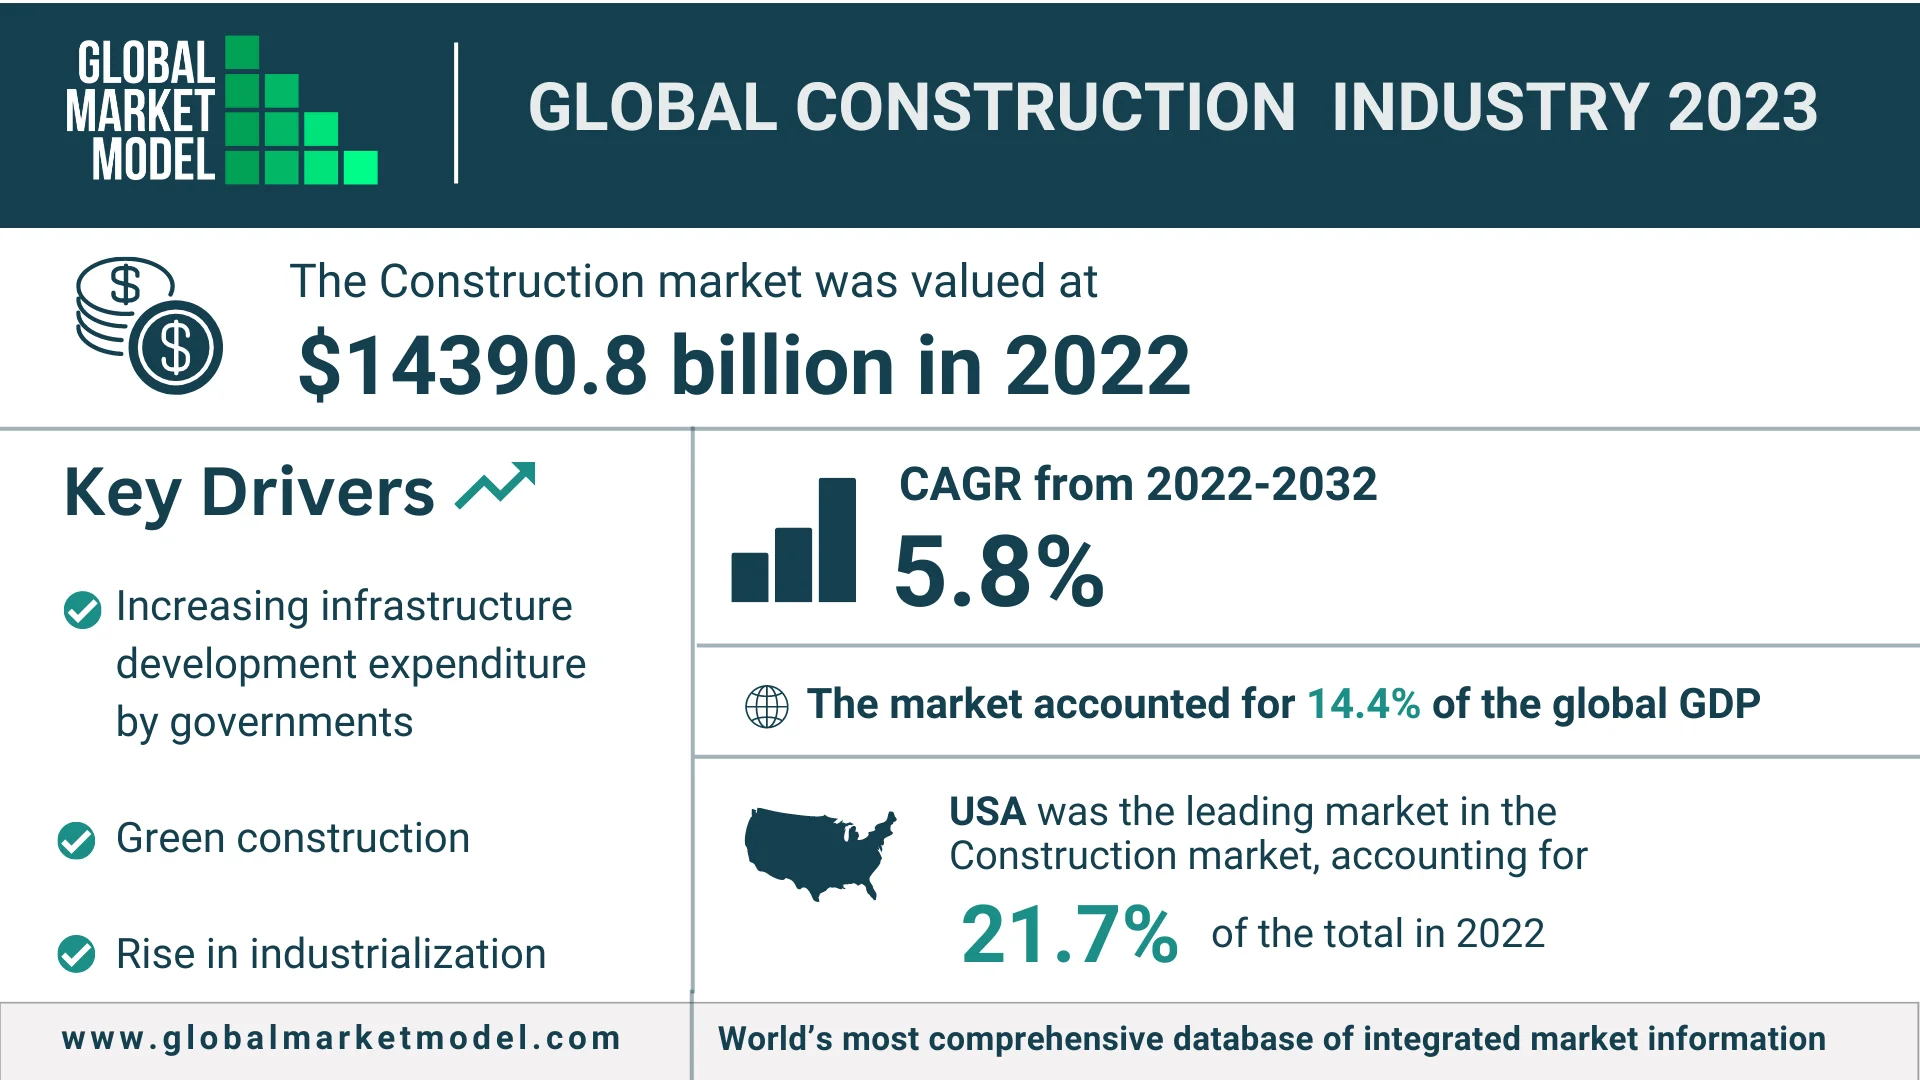 Global Construction Industry 2023